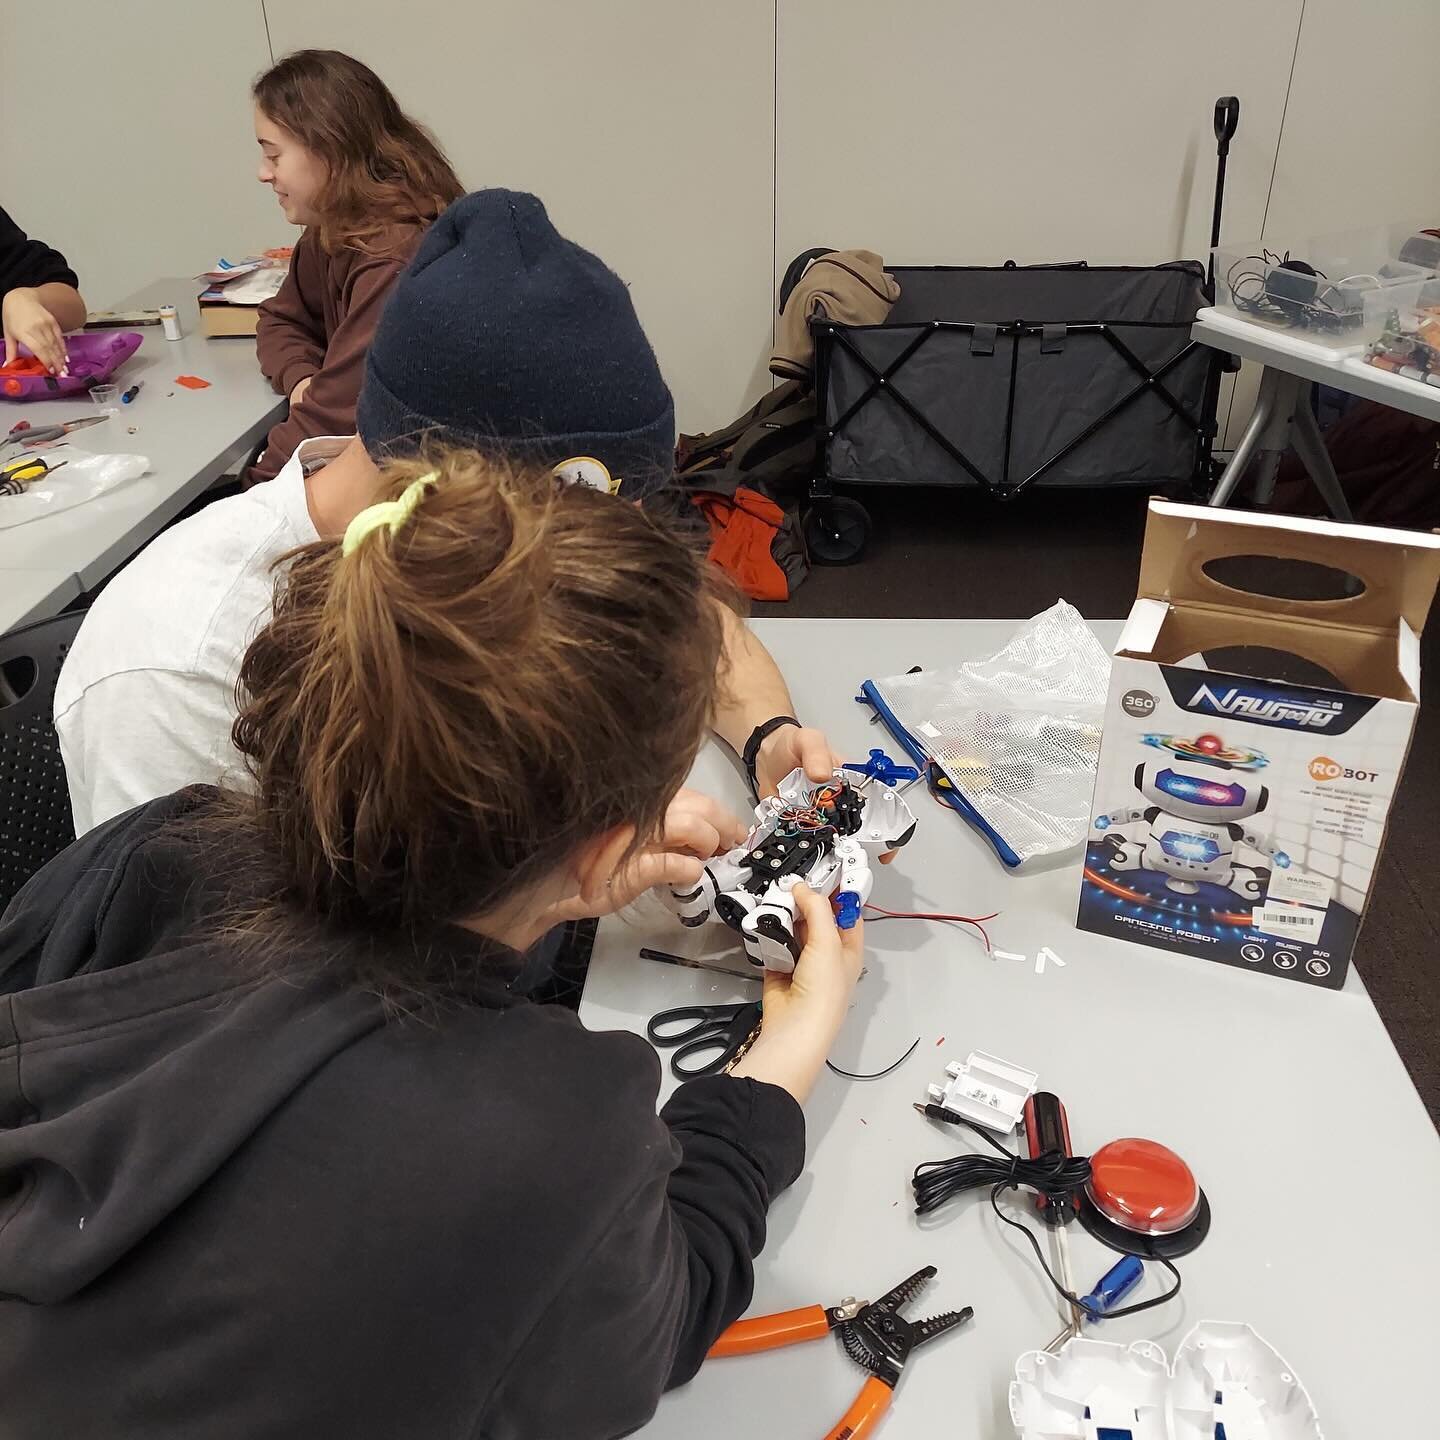 We kicked off the new quarter with another successful adaptation workshop! We adapted 7 toys, including dancing ducks, a &ldquo;fire&rdquo; breathing dinosaur, and a new dancing robot! Thanks to all who attended and volunteered. 

Reminder, there is 